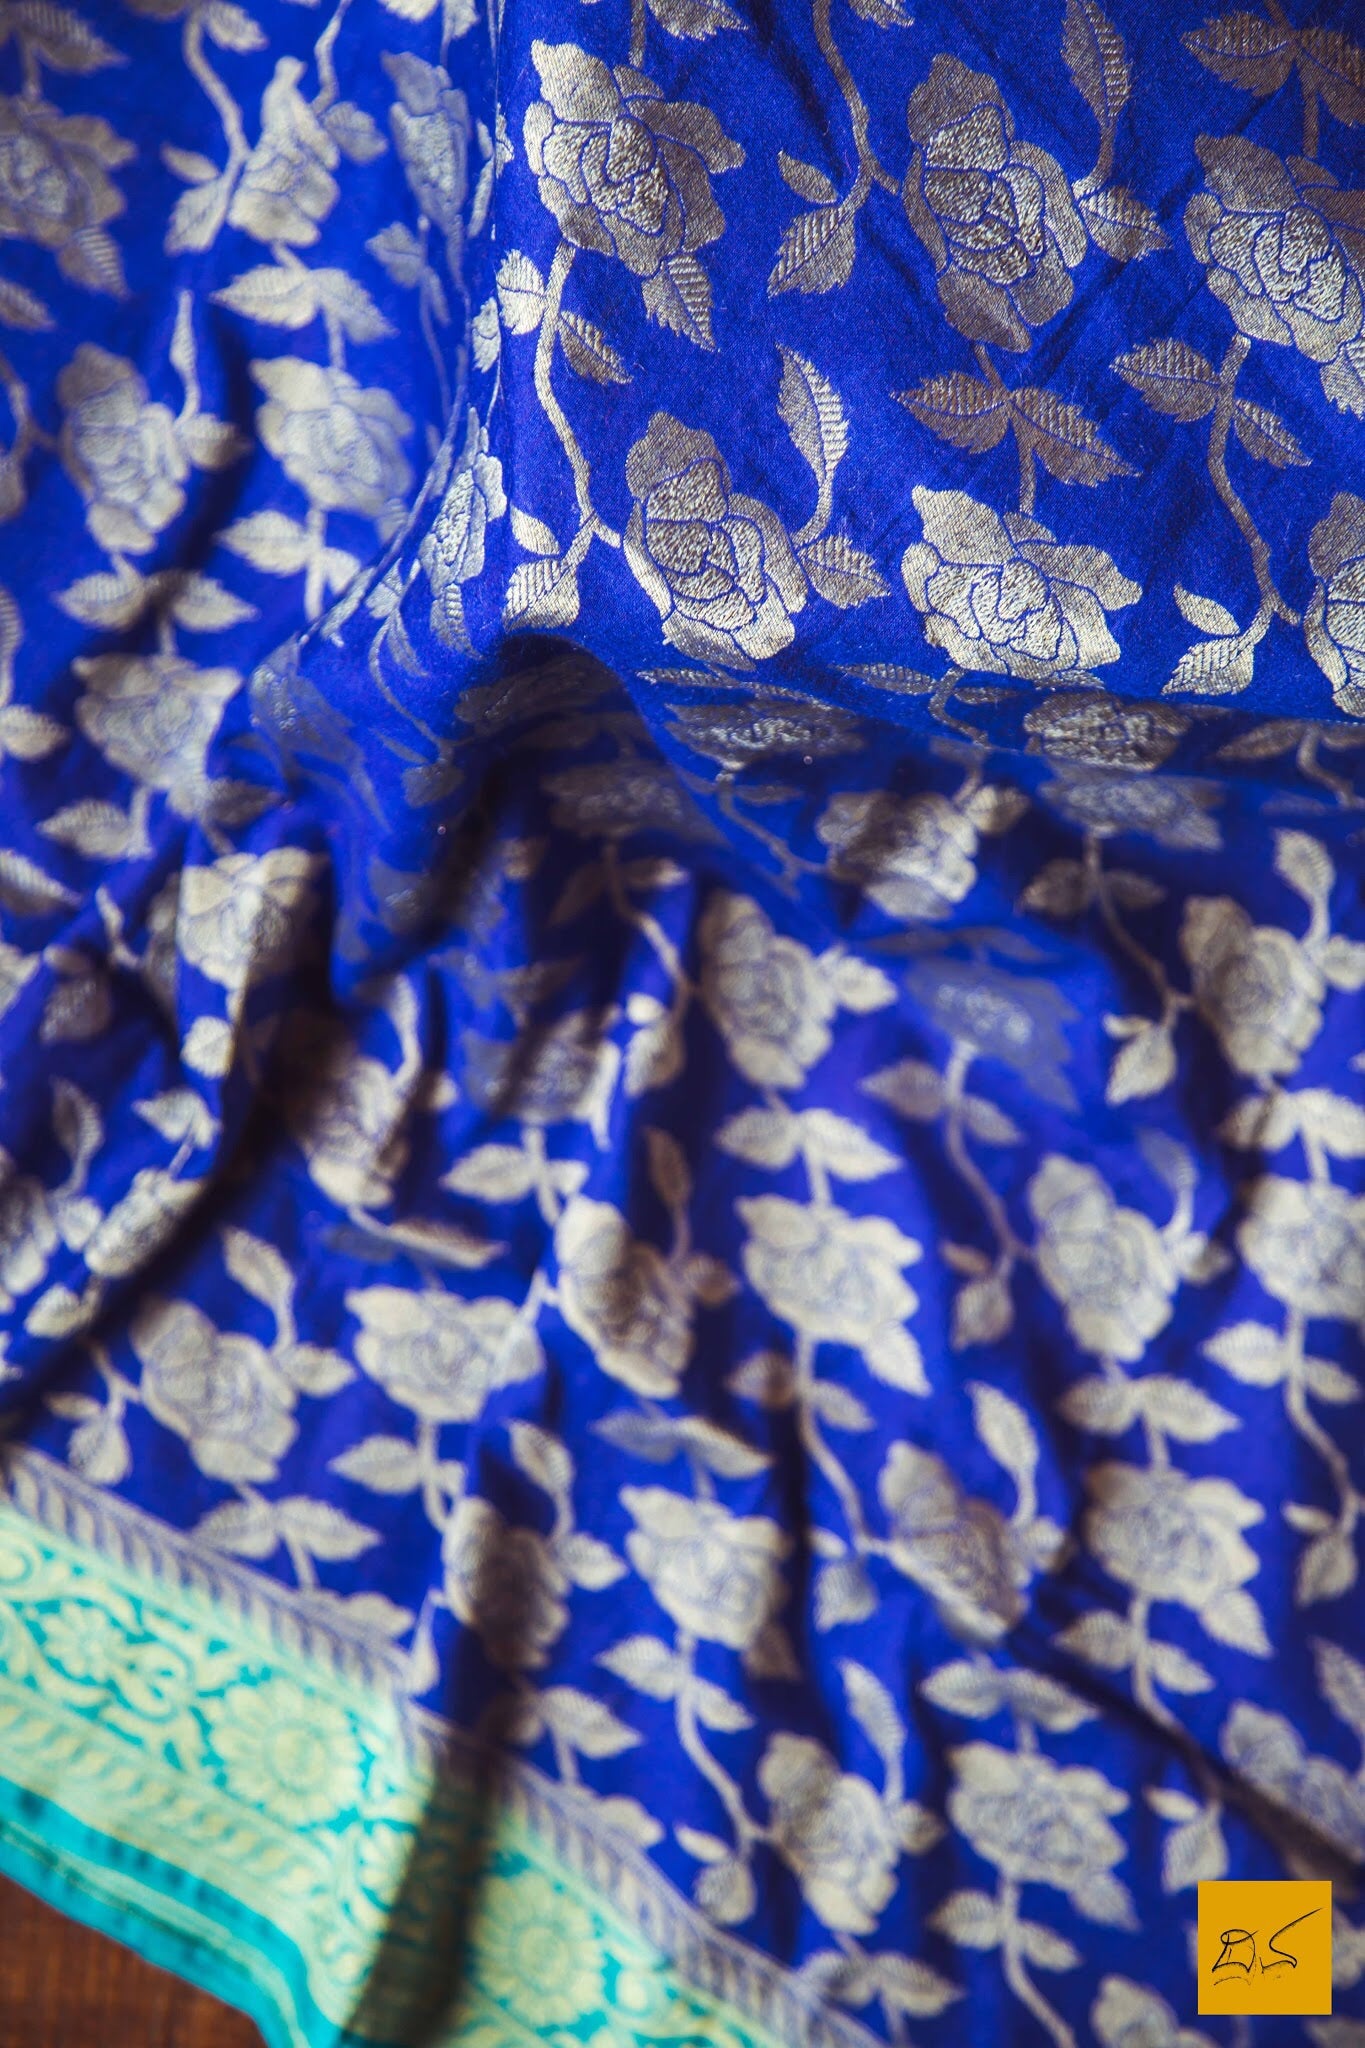 This is a gorgeous banarasi munga dupatta. New trend of munga Silk dupatta designs, munga Silk dupatta for artists, art lovers, architects, dupatta lovers, dupatta connoisseurs, musicians, dancers, doctors, munga Silk dupatta, indian dupatta images, latest dupattas with price, only dupatta images, new munga silk dupatta design.